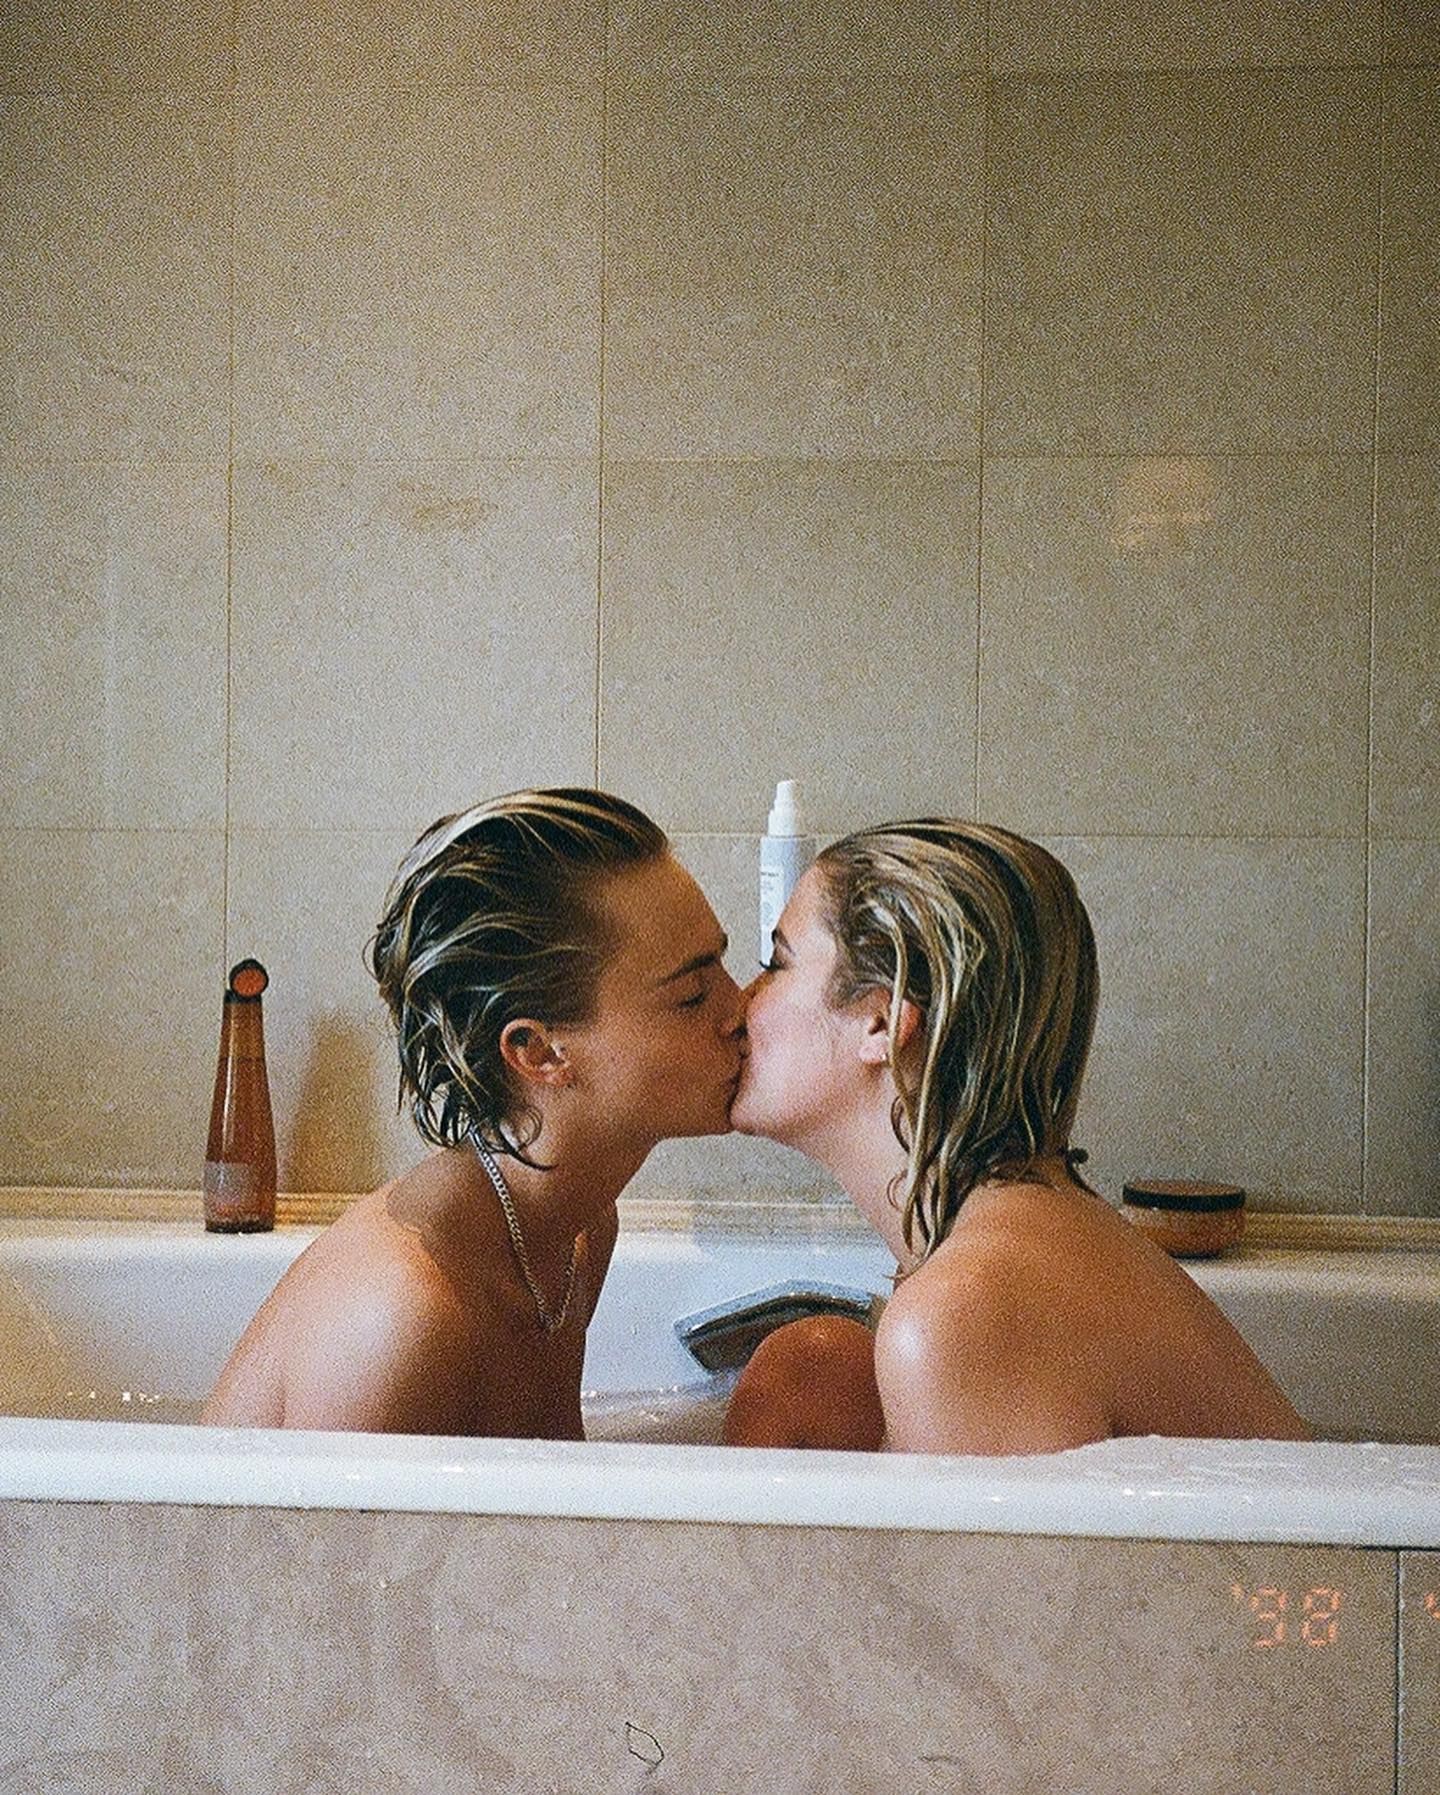 Lesbians naked in the shower